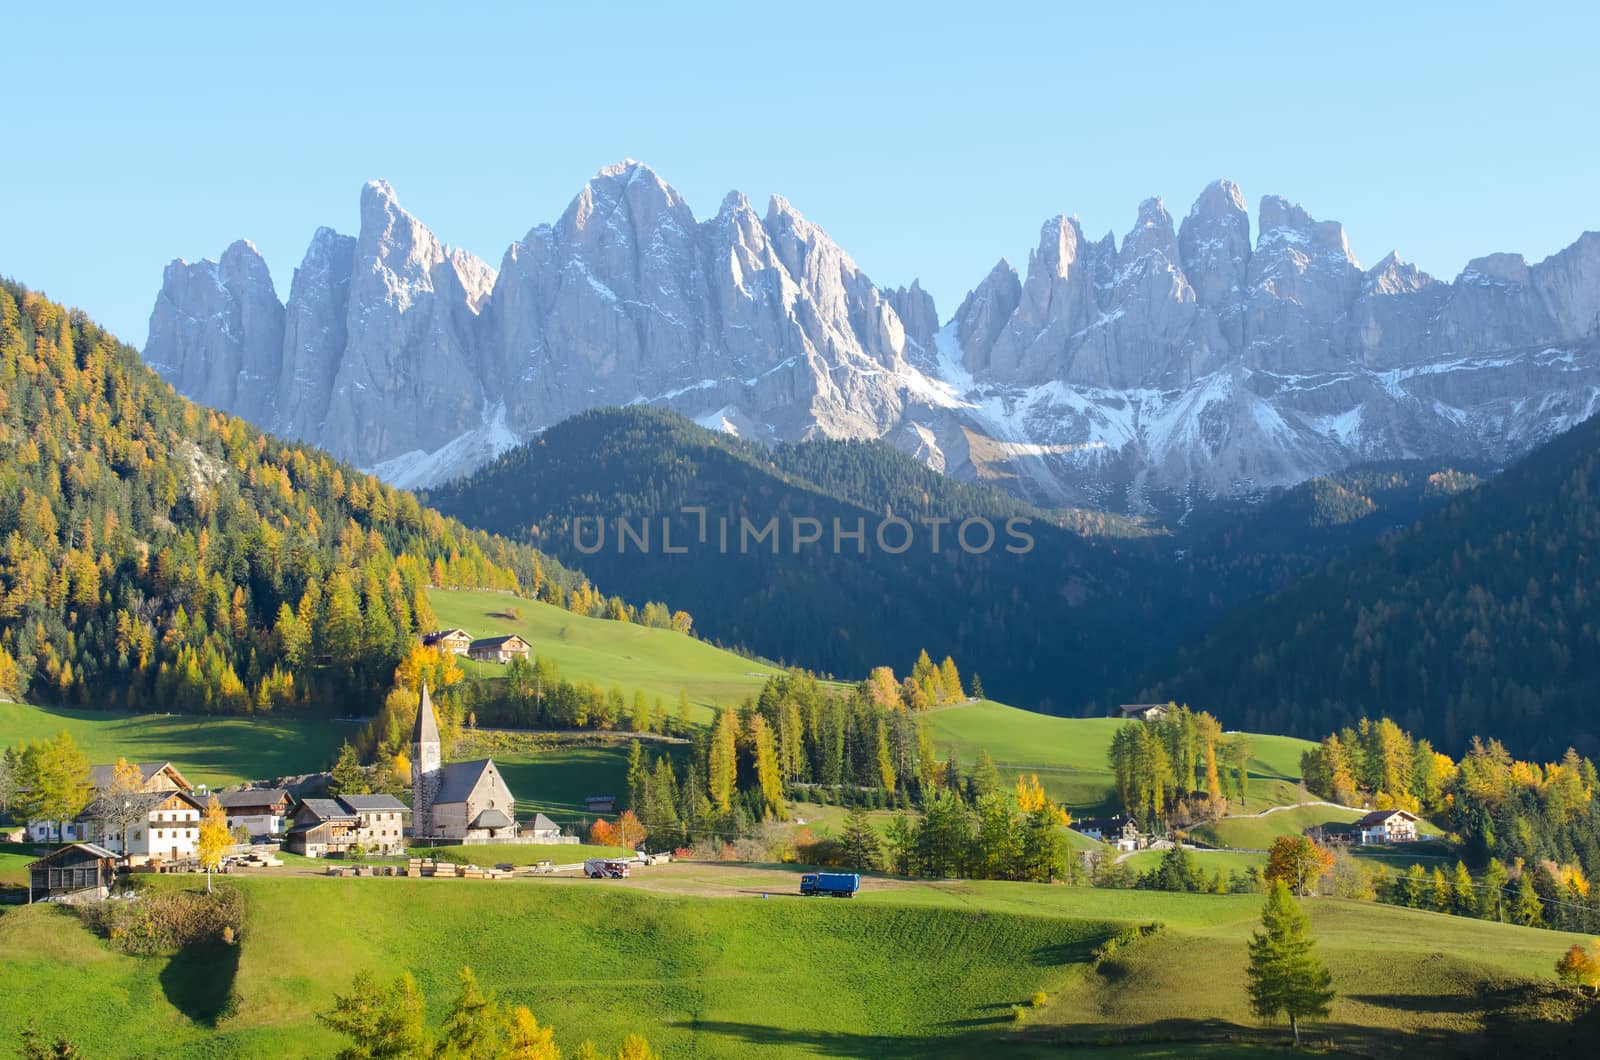 St. Magdalena with its characteristic church in front of the Geisler Dolomites mountain peaks in the Villnosstal in Italy in autumn.